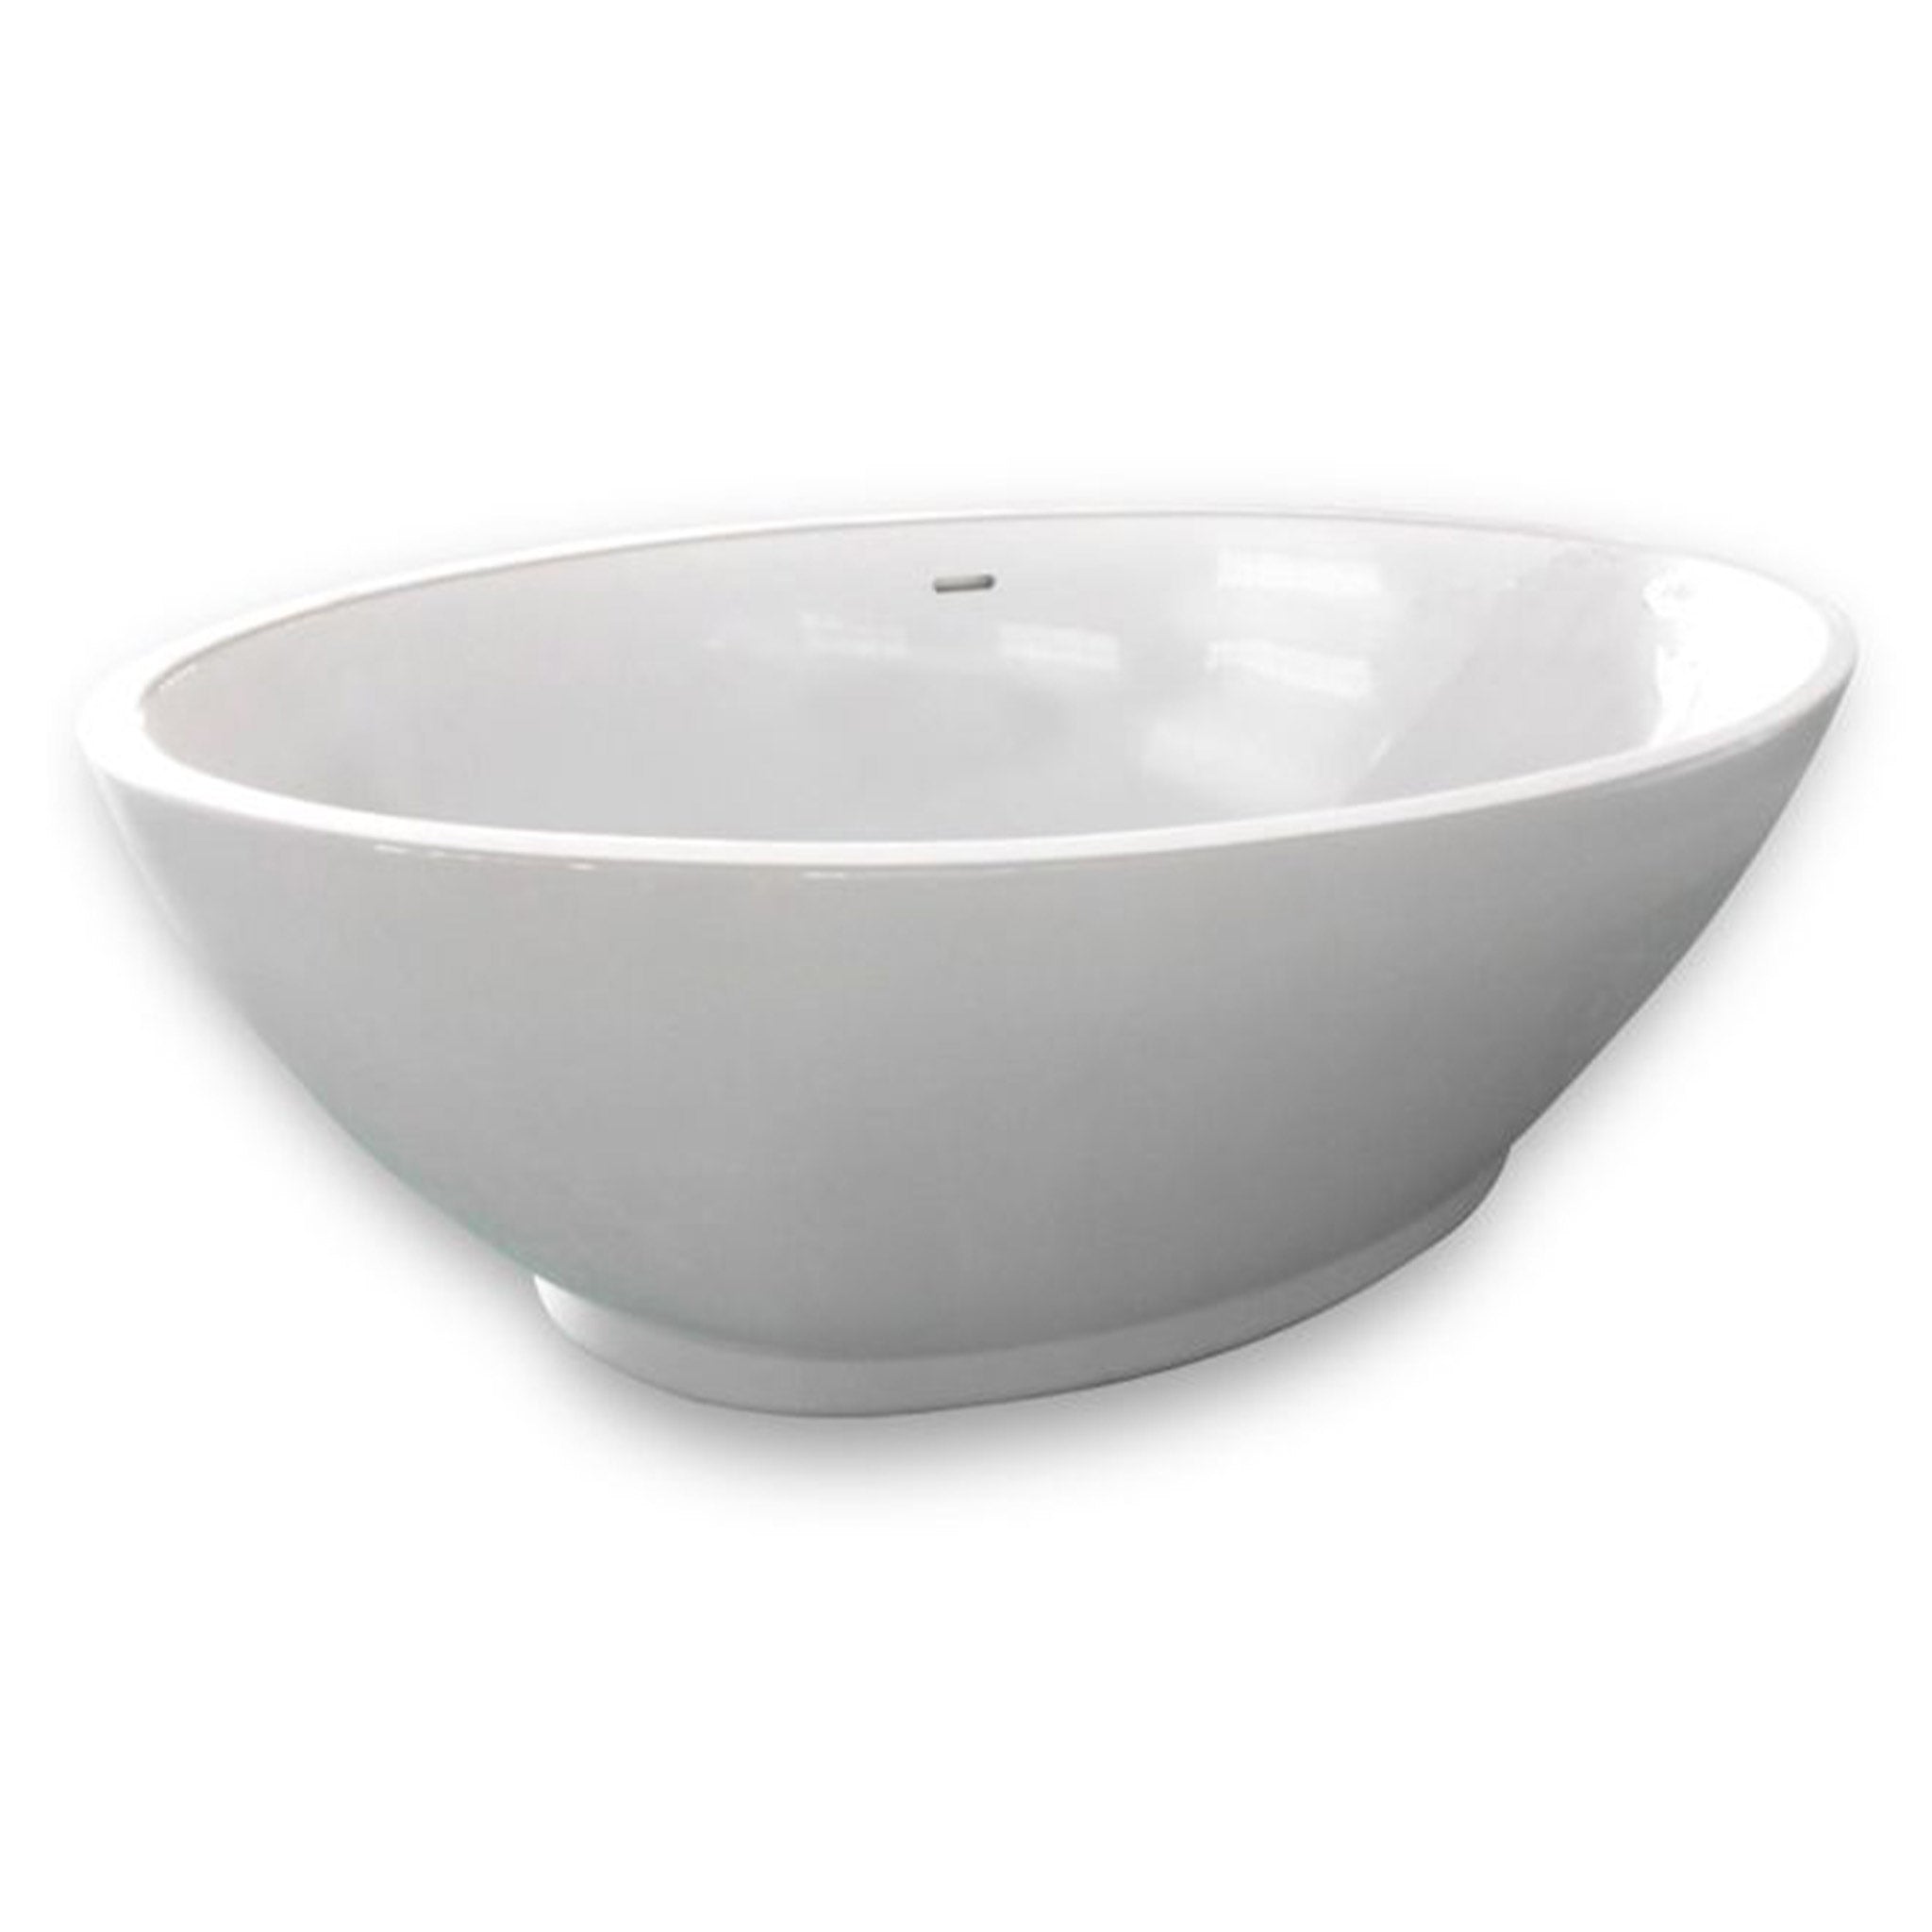 BC Designs Chalice Minor Double Ended Acrymite Bath 1650 x 900mm